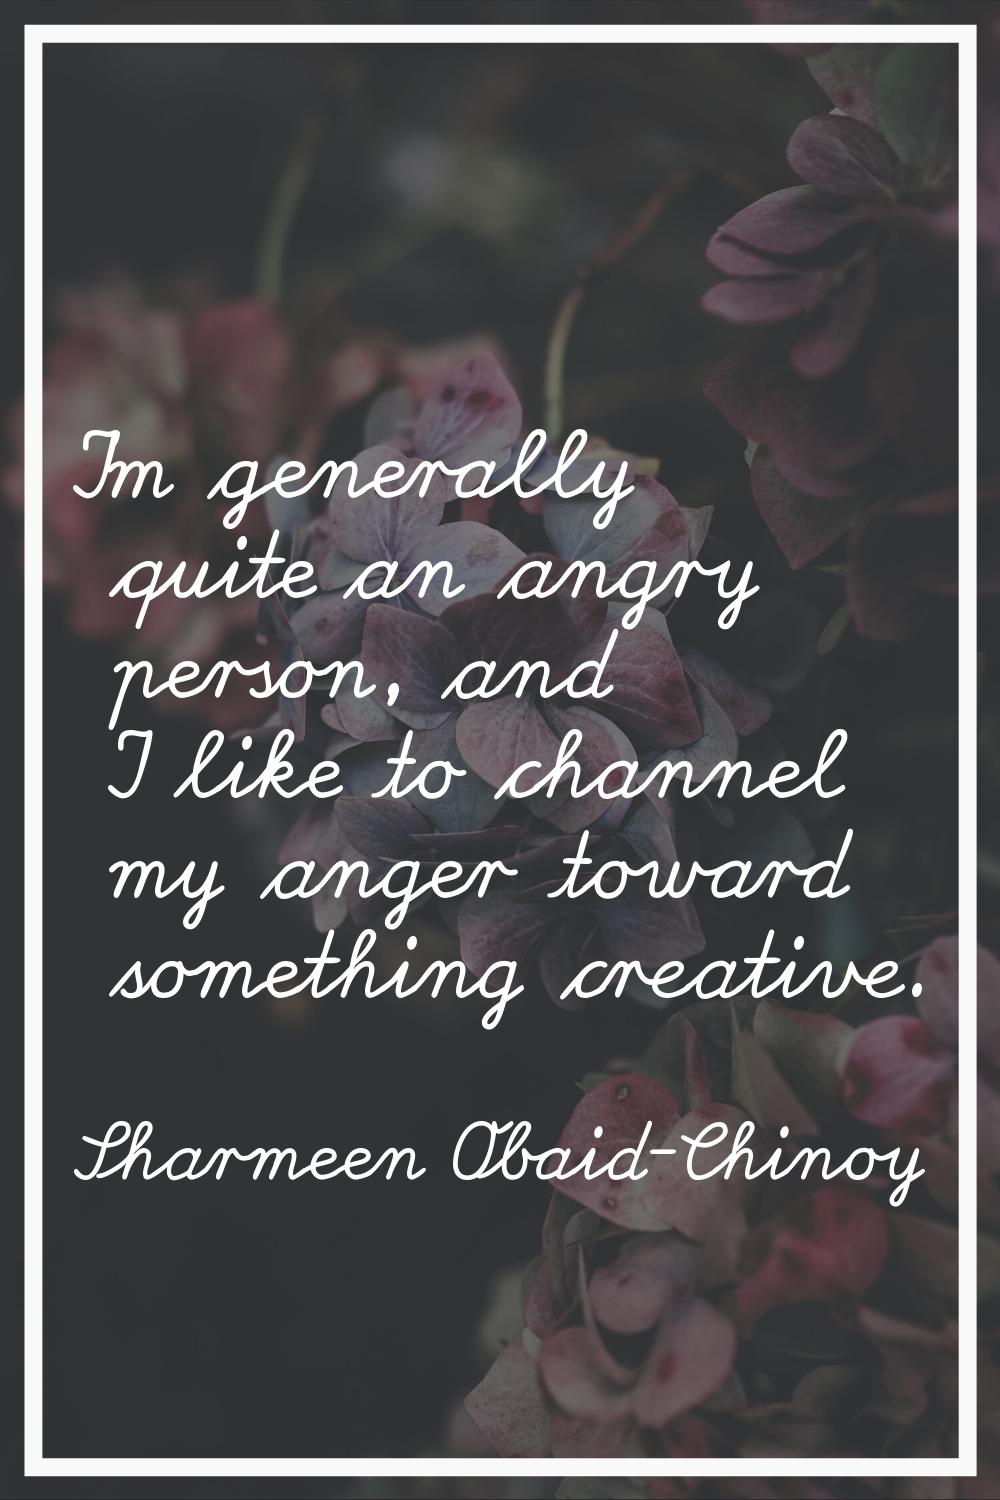 I'm generally quite an angry person, and I like to channel my anger toward something creative.